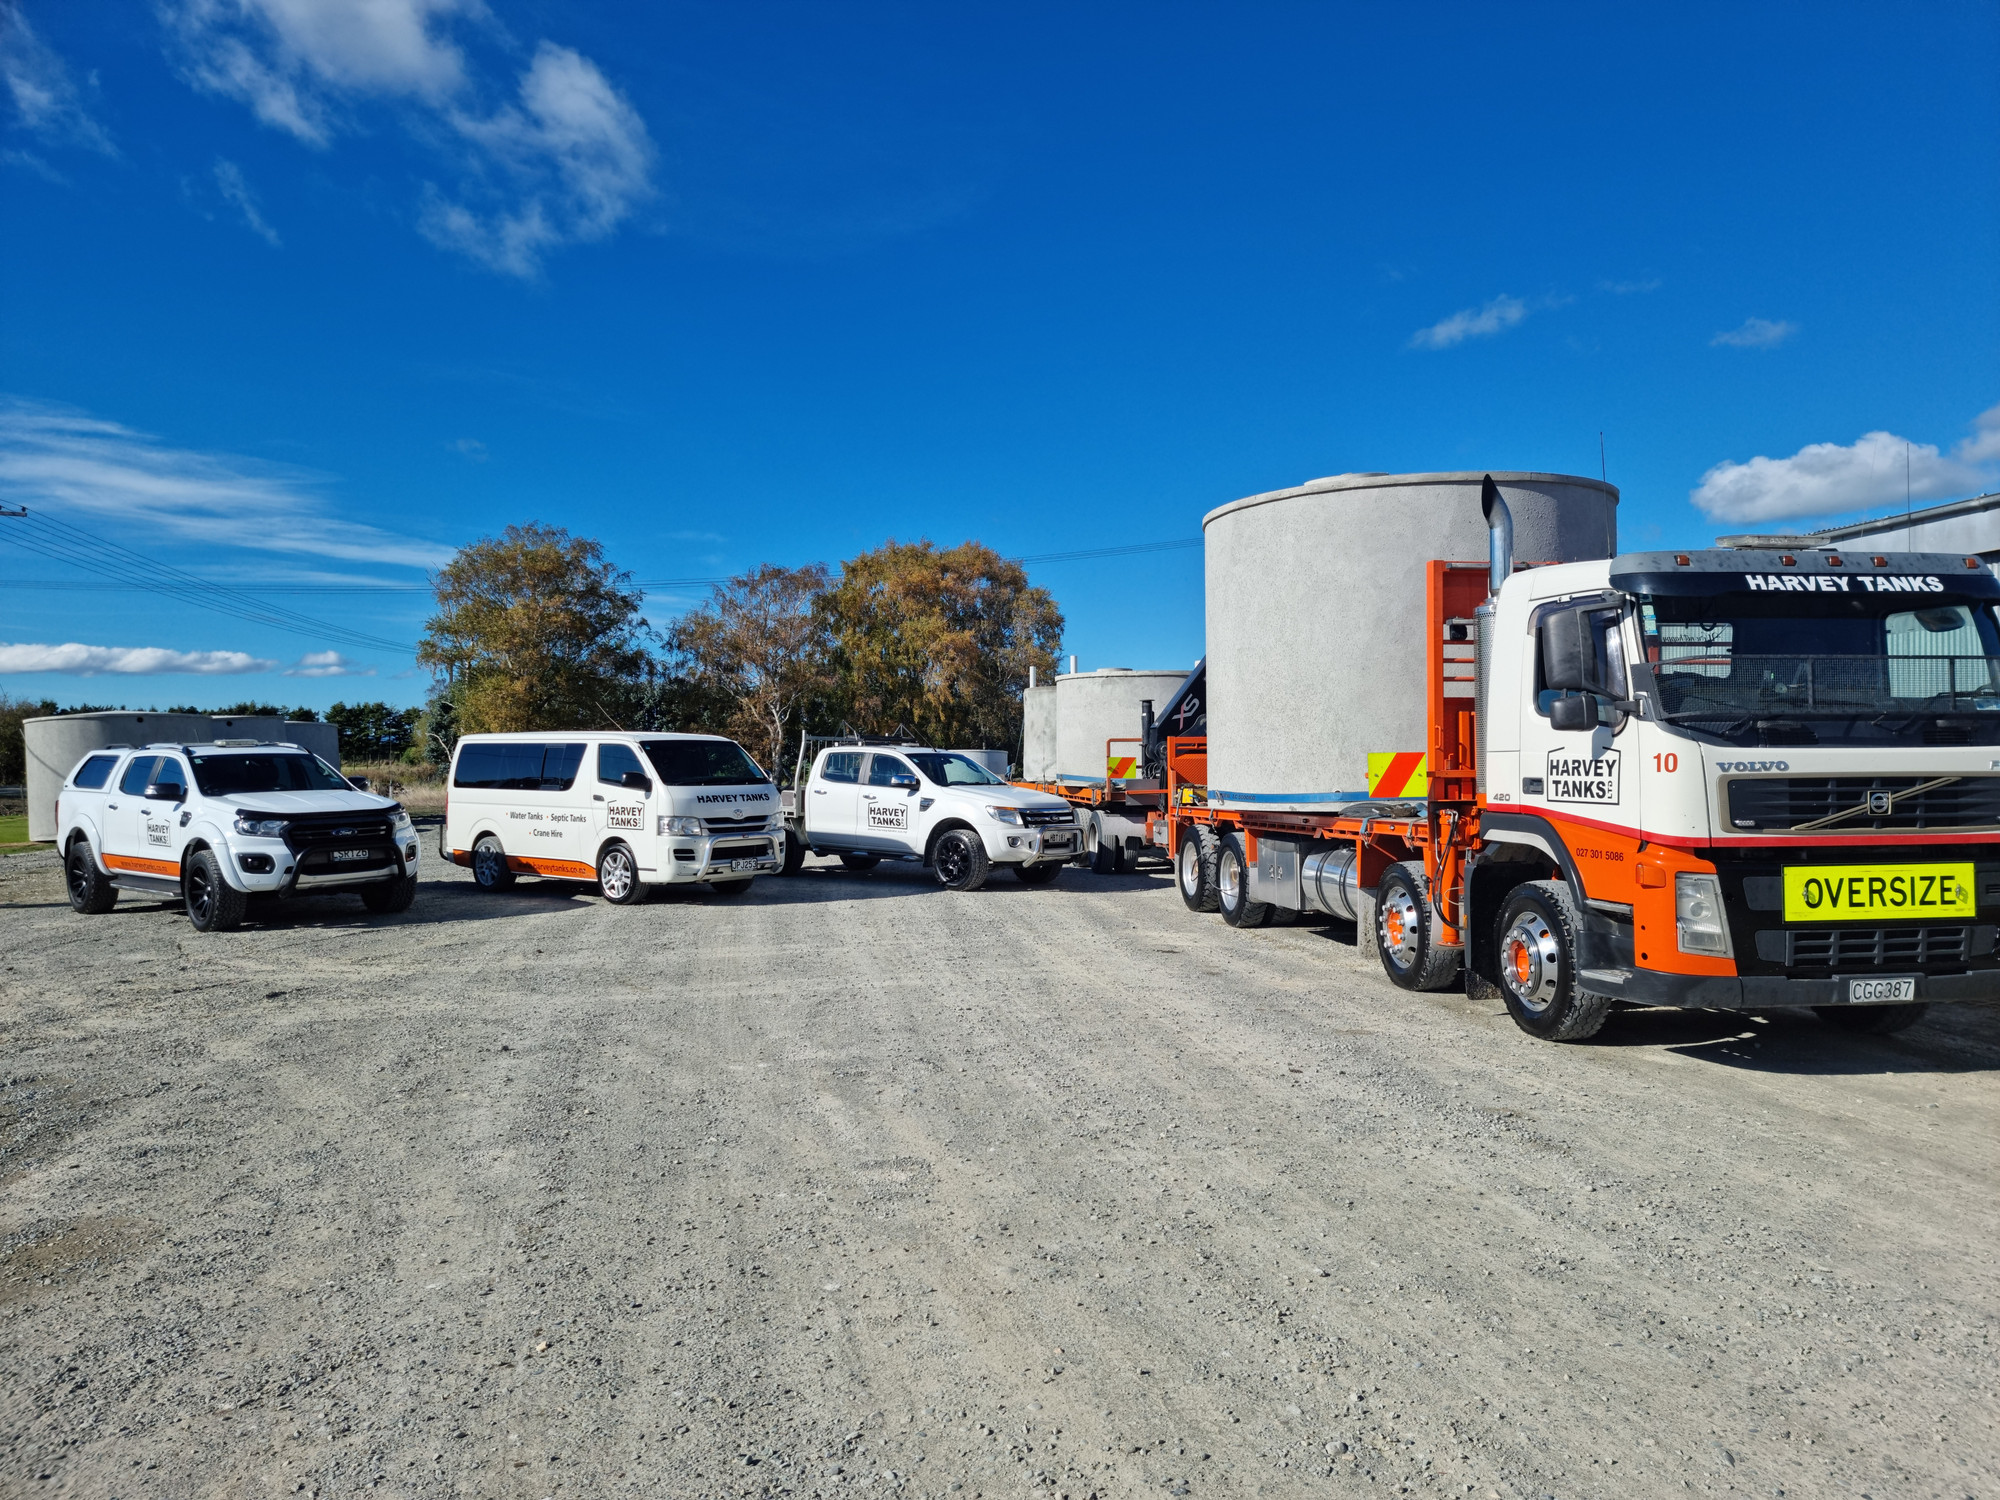 Harvey Tanks Deliver water tanks to the South Island